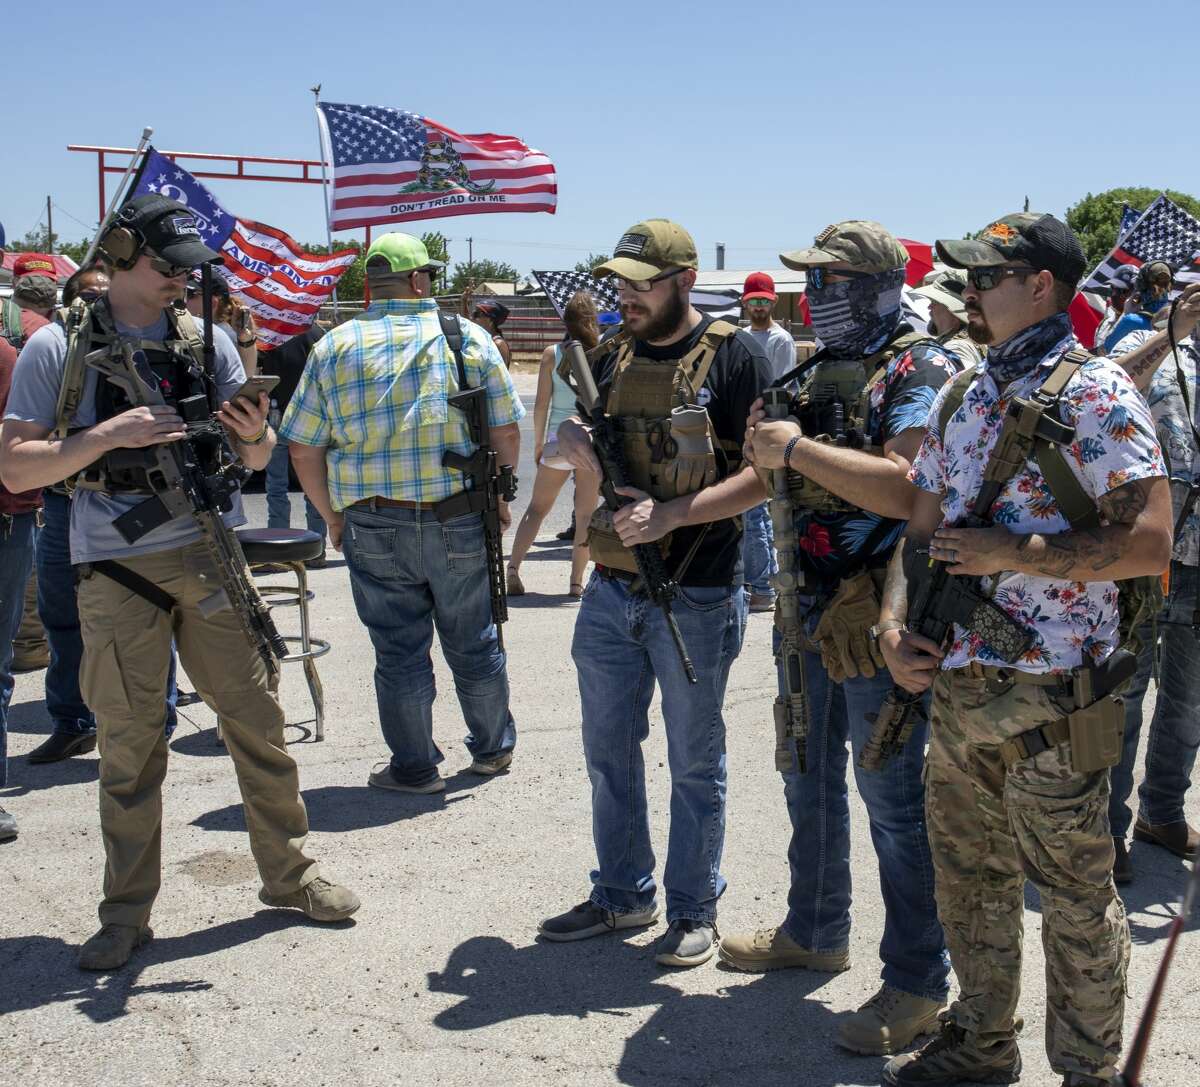 Open Carry Texas members protest on Saturday, June 6, 2020 at Big Daddy Zanes in West Odessa.